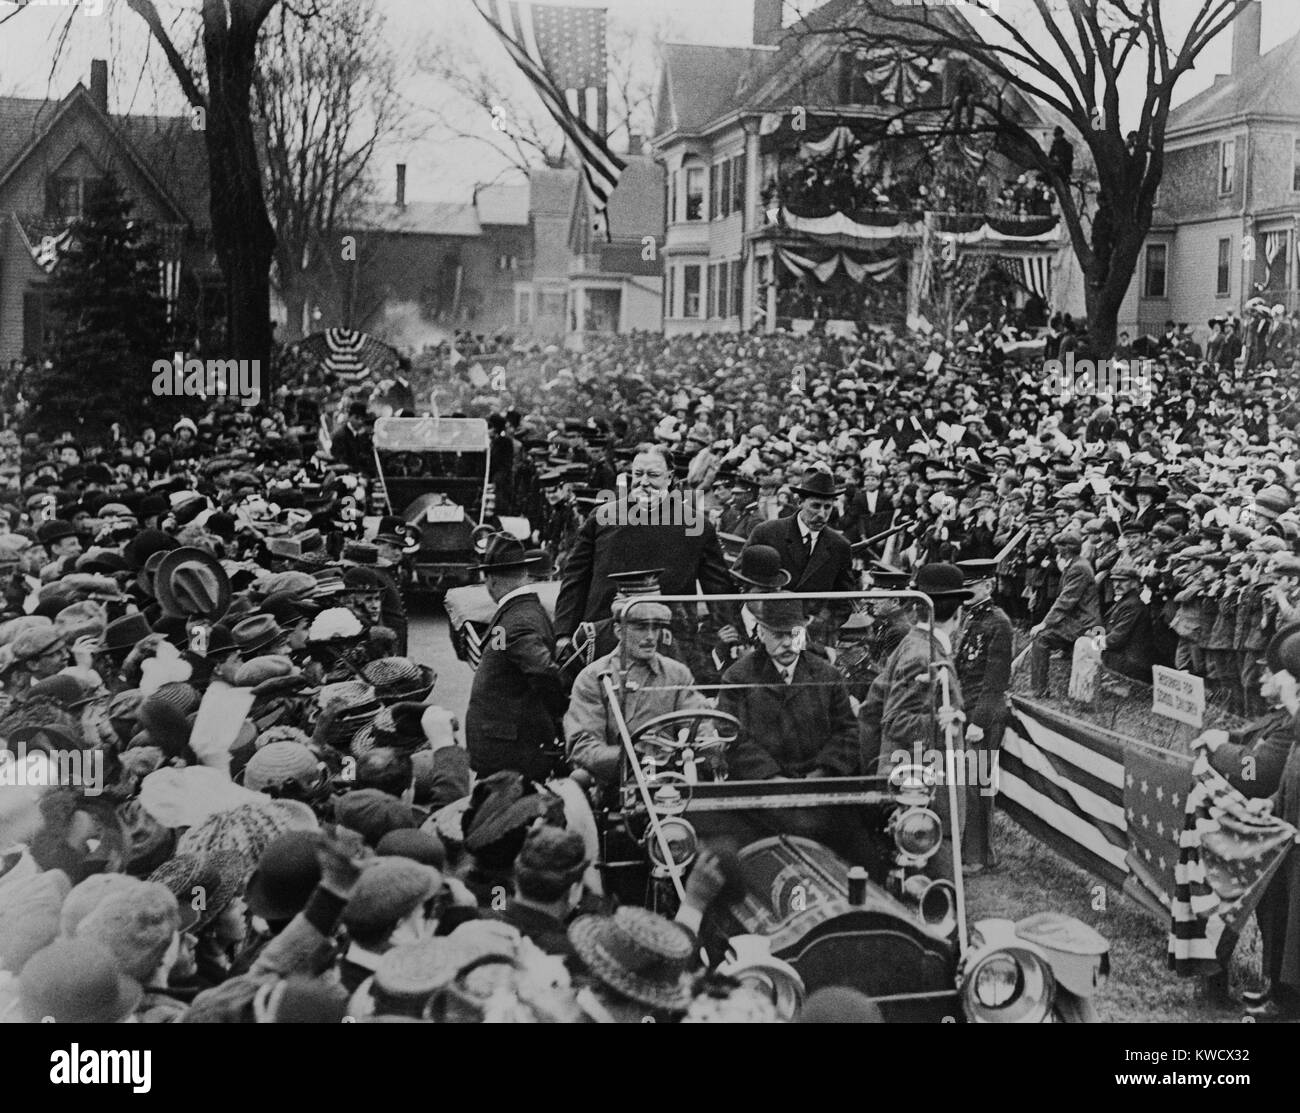 President William Howard Taft parading in an open automobile, c. 1912. Location unknown (BSLOC 2017 2 122) Stock Photo